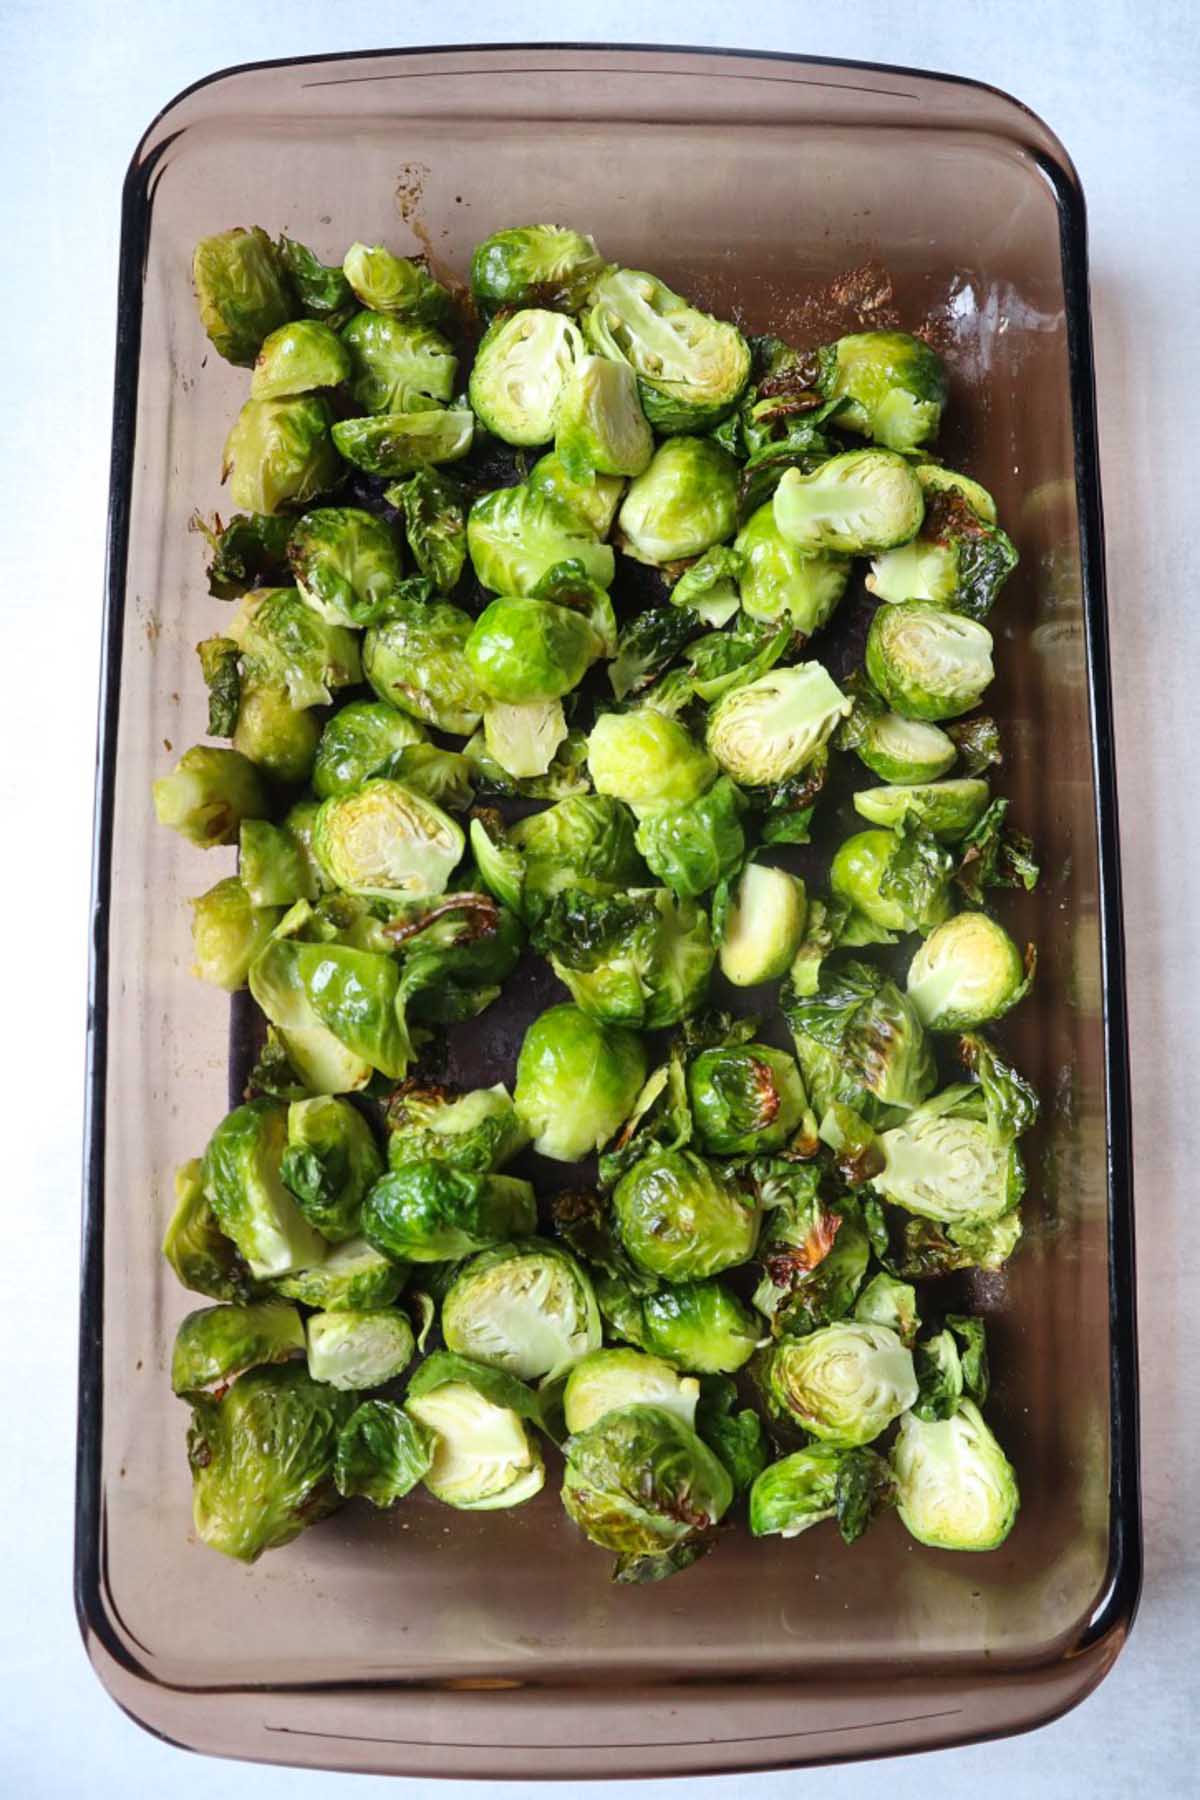 sliced brussel sprouts in a glass dish